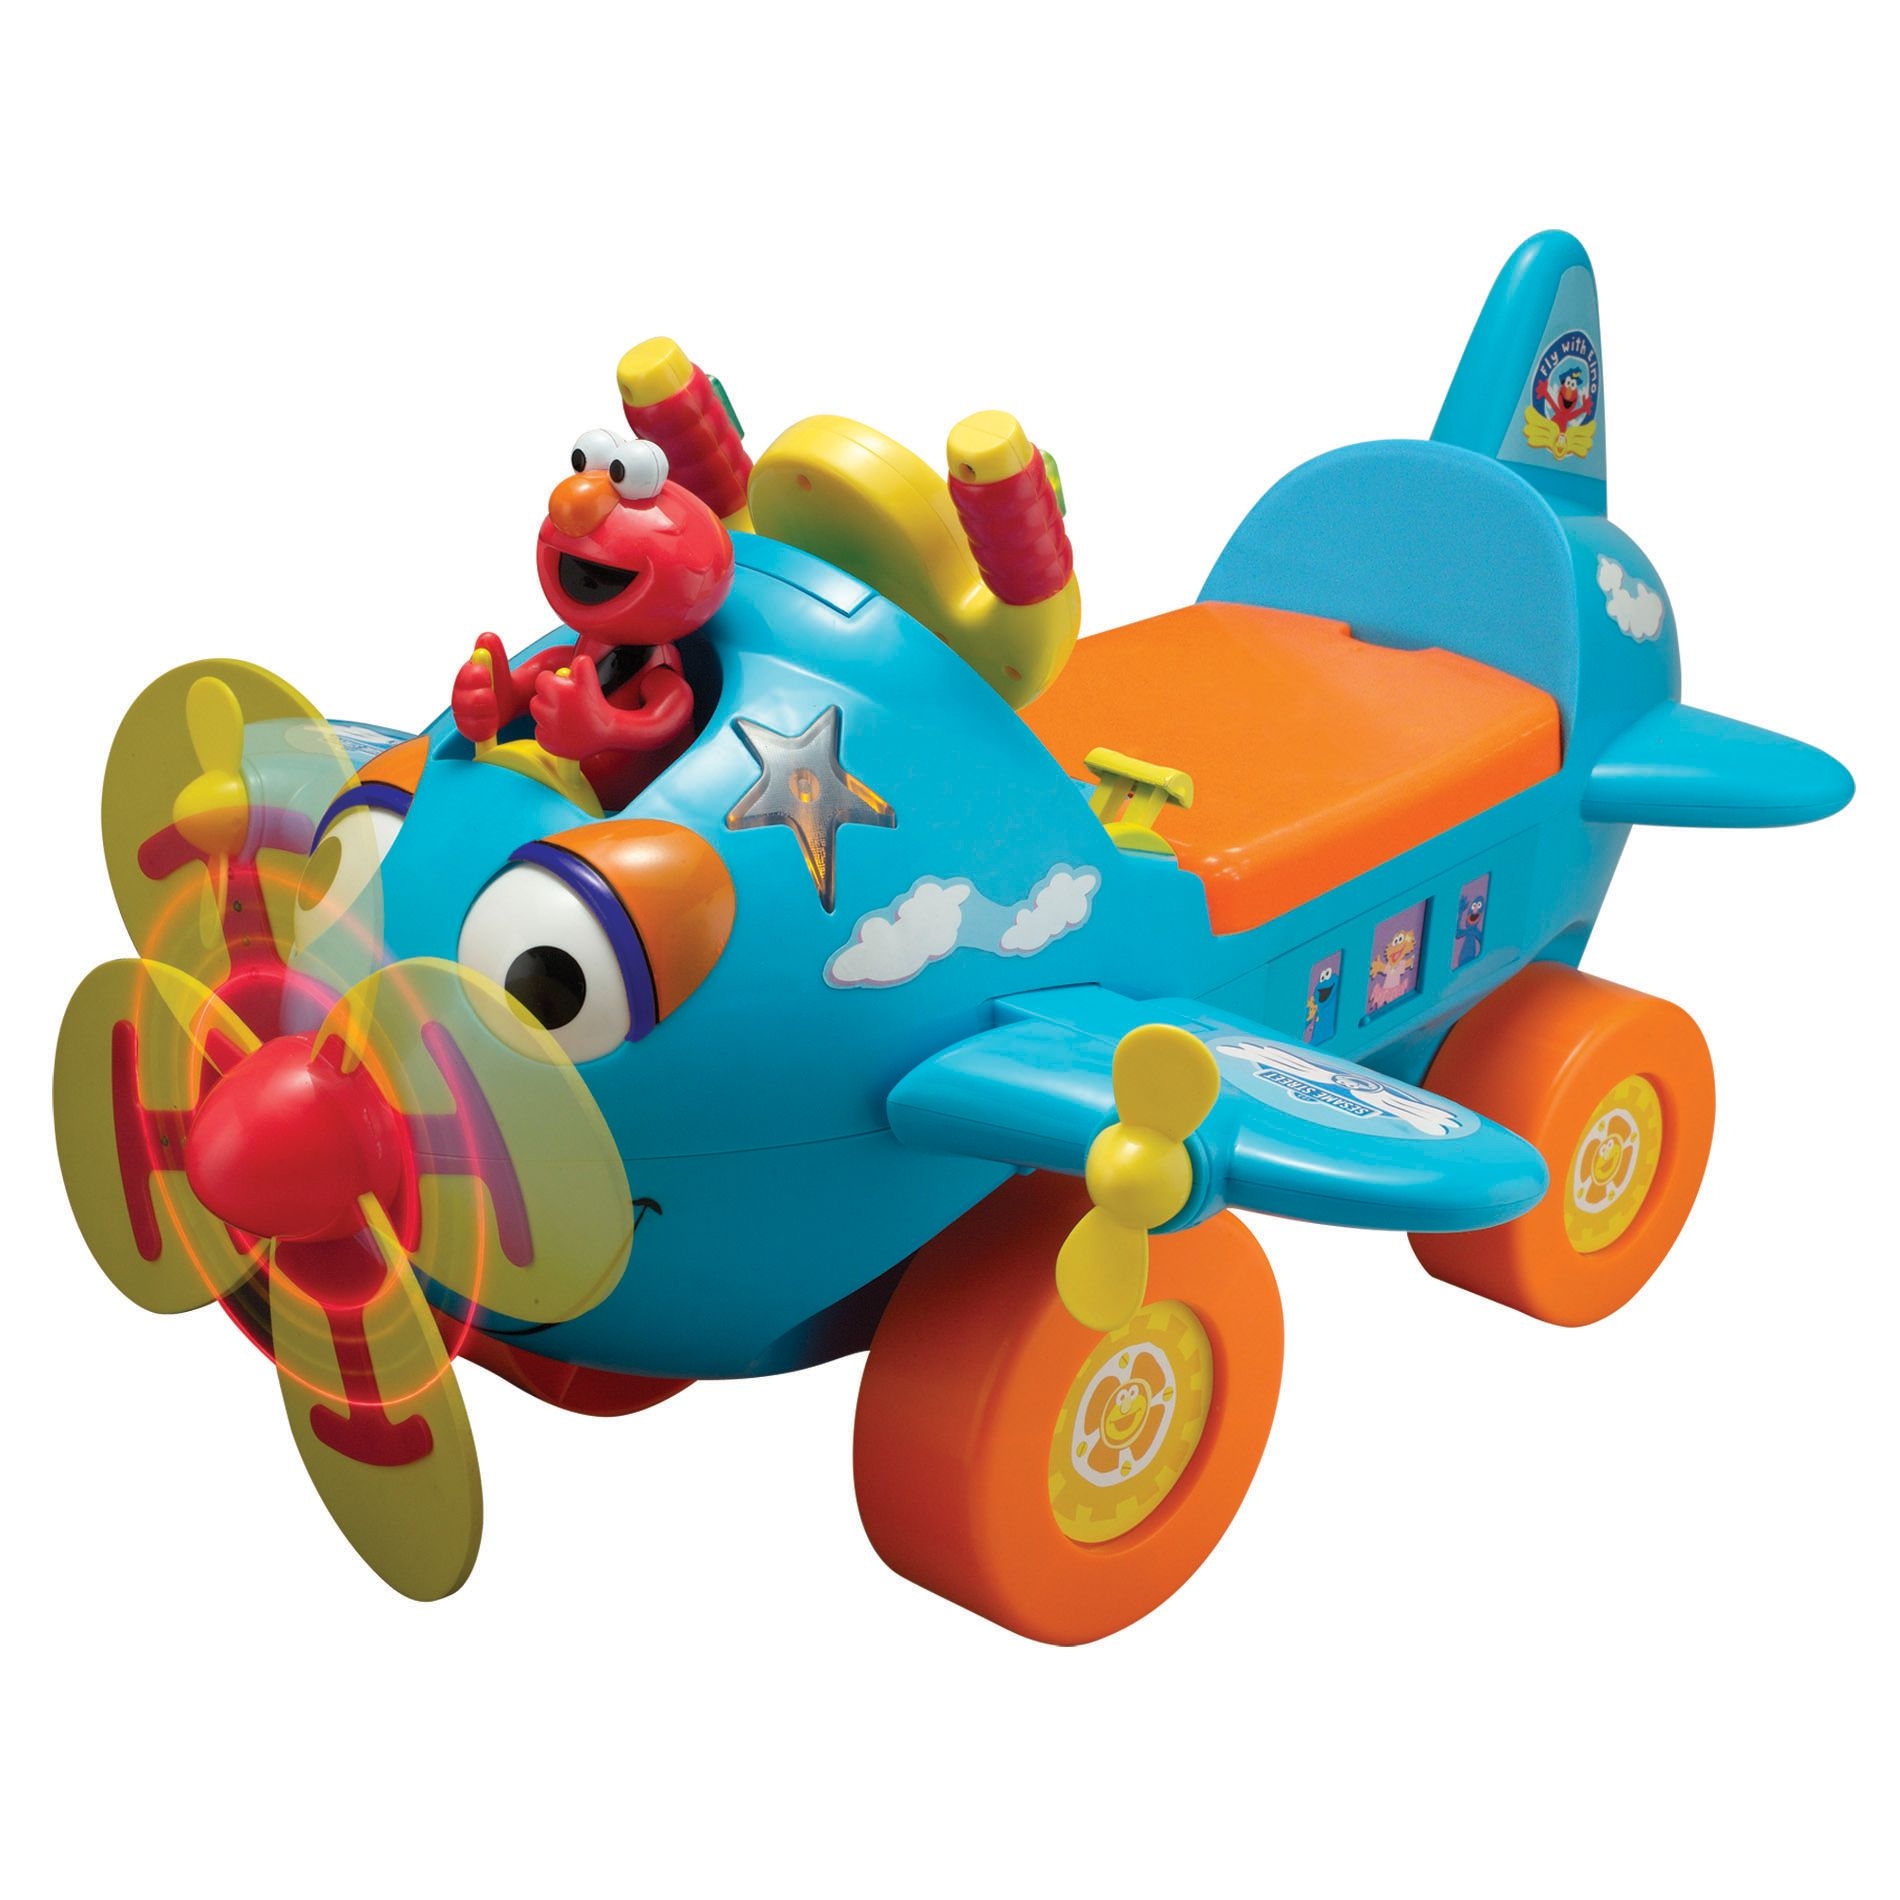 Airplane riding toy 1